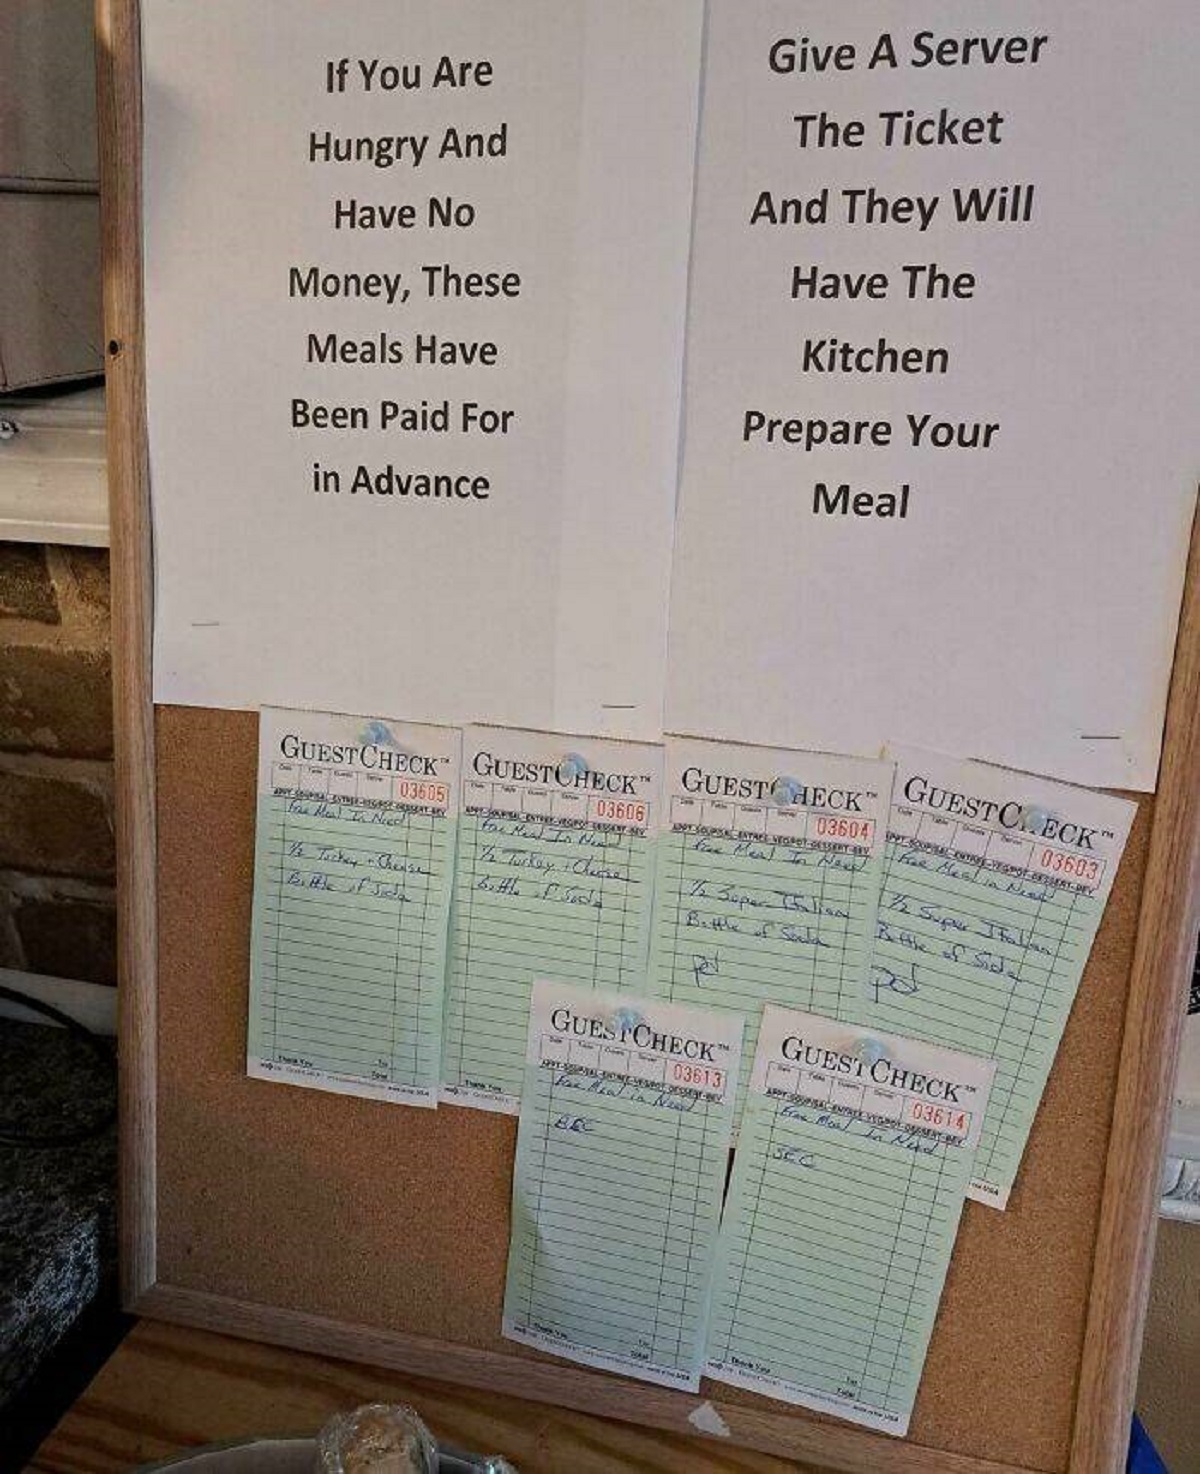 "Restaurant In My Town Has A Board With “No Questions Asked” Prepaid Meals For People In Need"